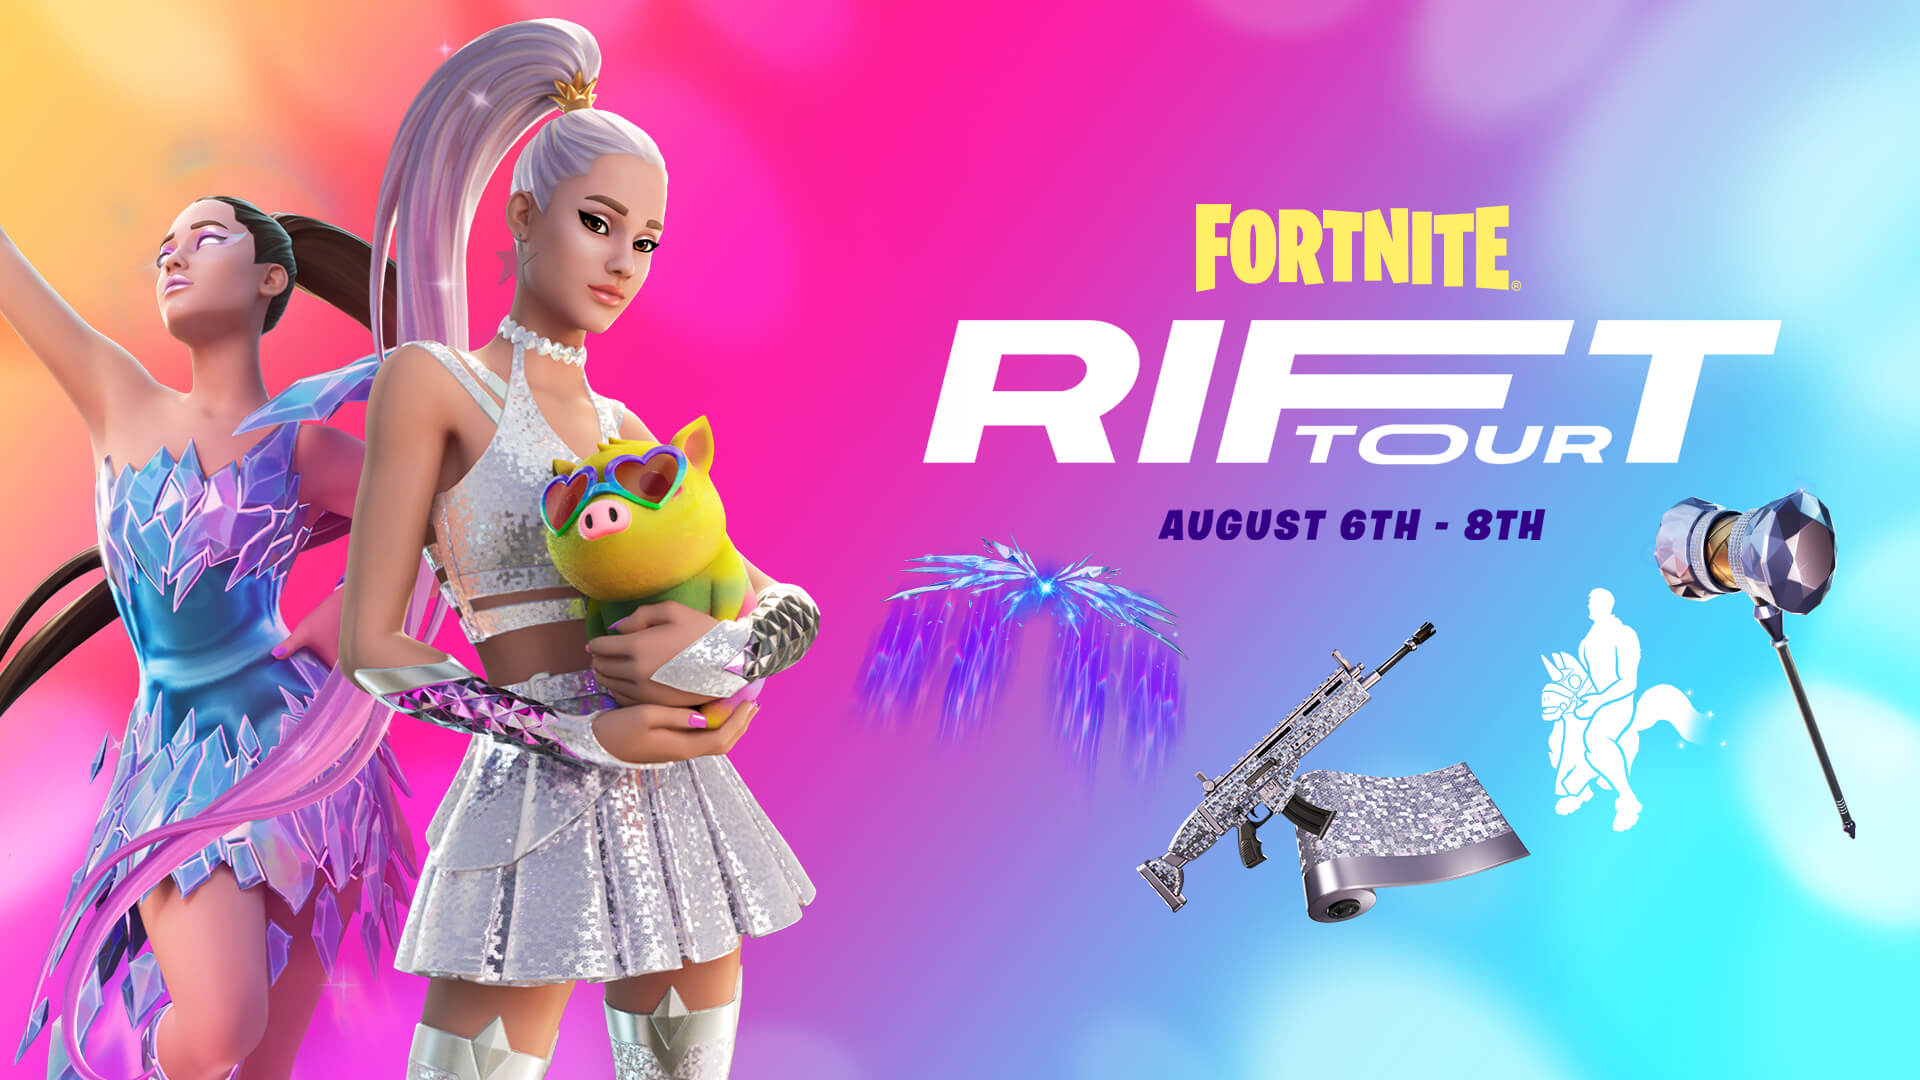 Image for Fortnite Rift Tour times and how to watch The Rift Tour concert